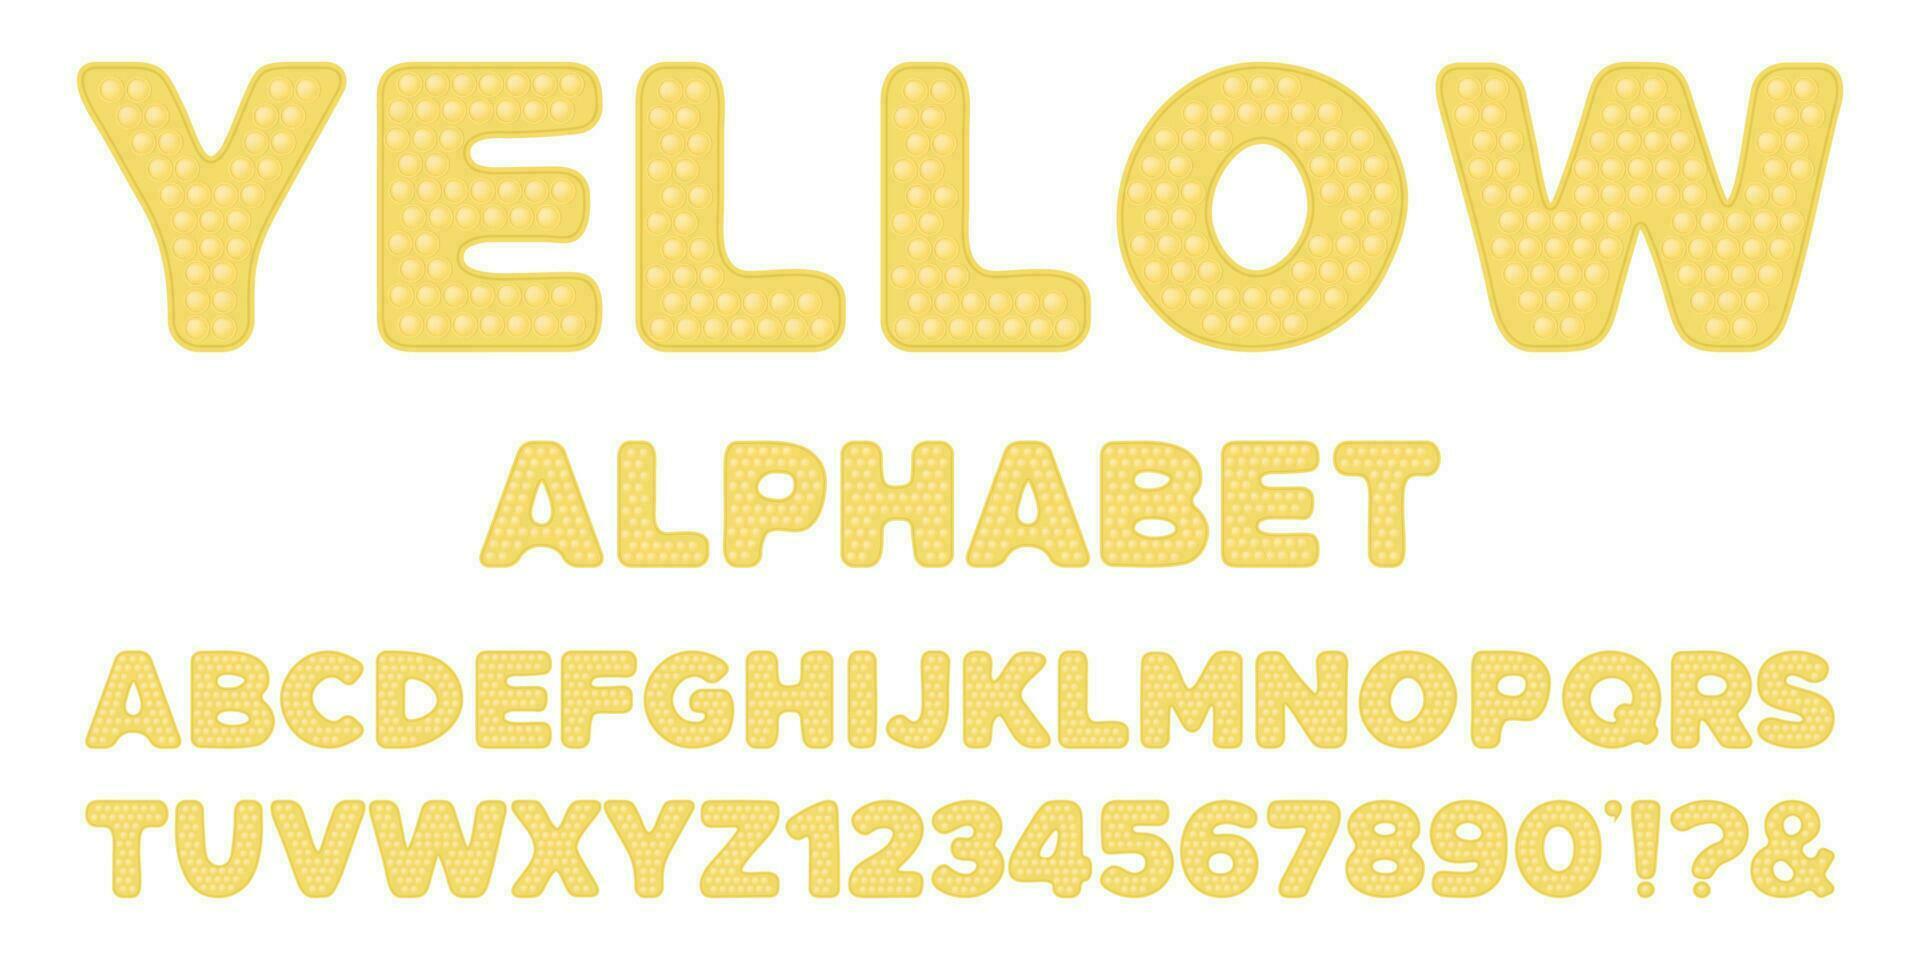 Popping toy font design - yellow alphabet and numbers set in style of trendy silicon fidget toys in pastel colors. Bubble sensory letters. Isolated cartoon vector illustration.